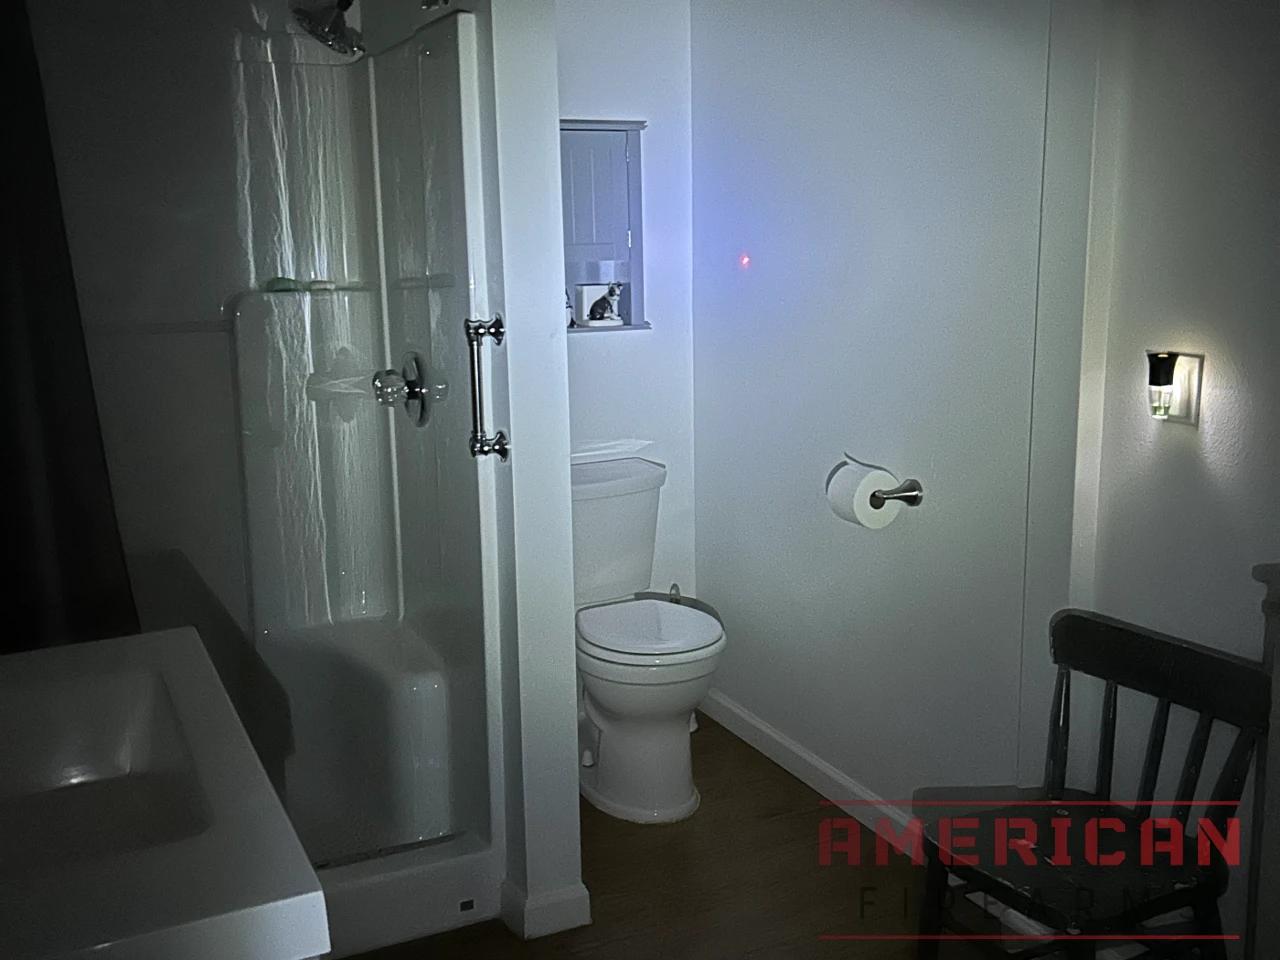 The light is sufficient to light a small bathroom or hallway, but that's about it.